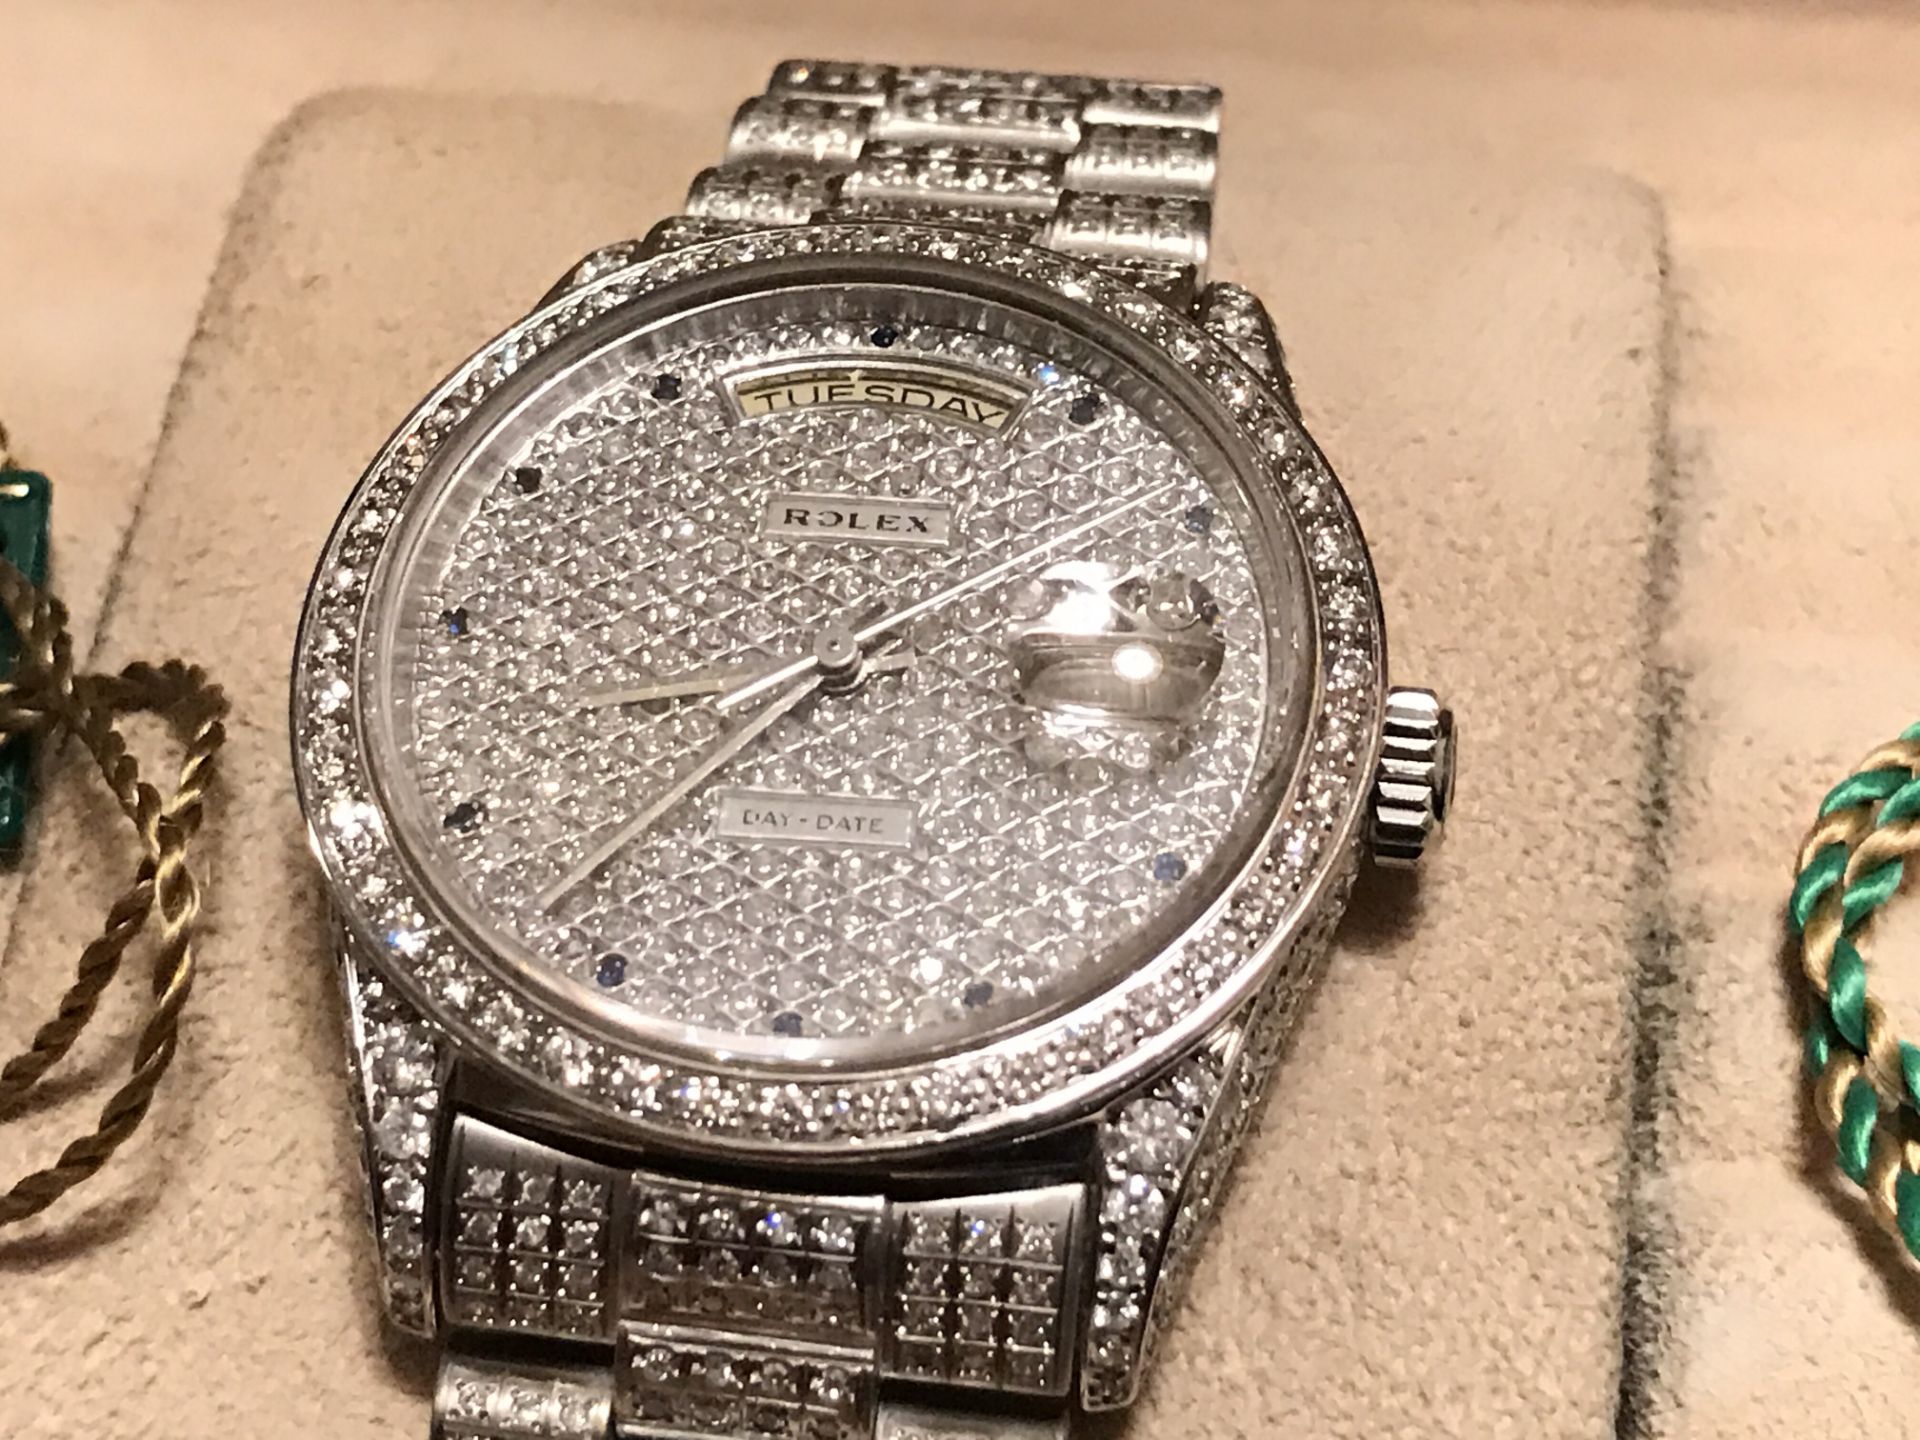 MENS SOLID WHITE GOLD DIAMOND/ SAPPHIRE DAY-DATE “SUPER PRESIDENT” WATCH